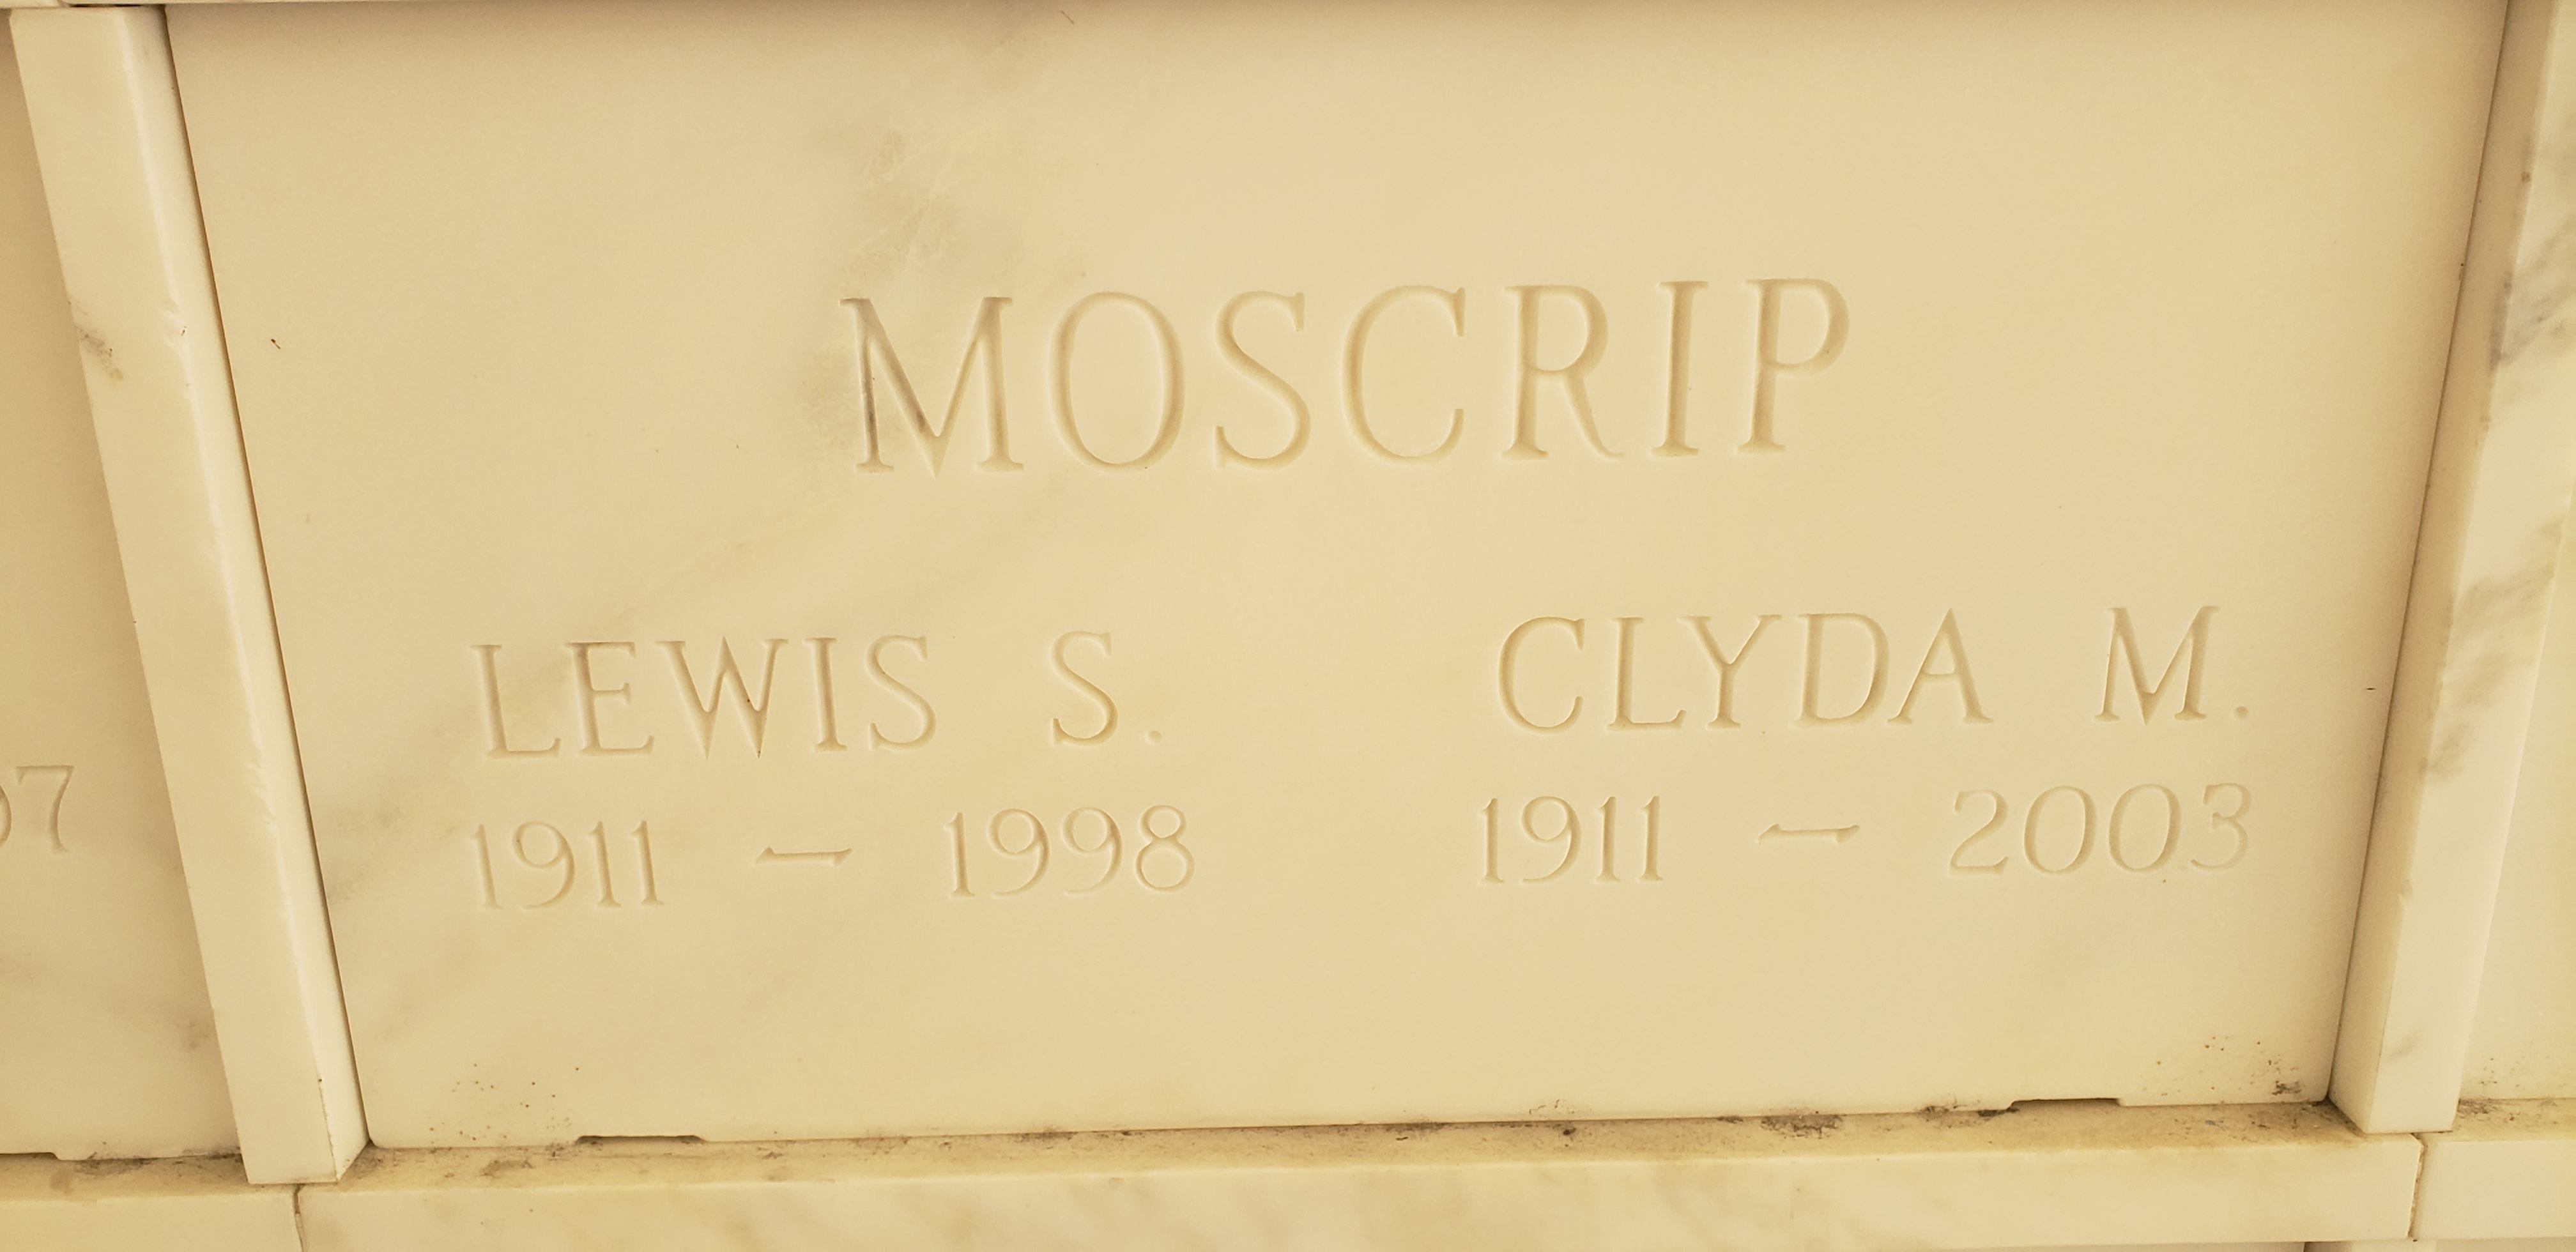 Lewis S Moscrip